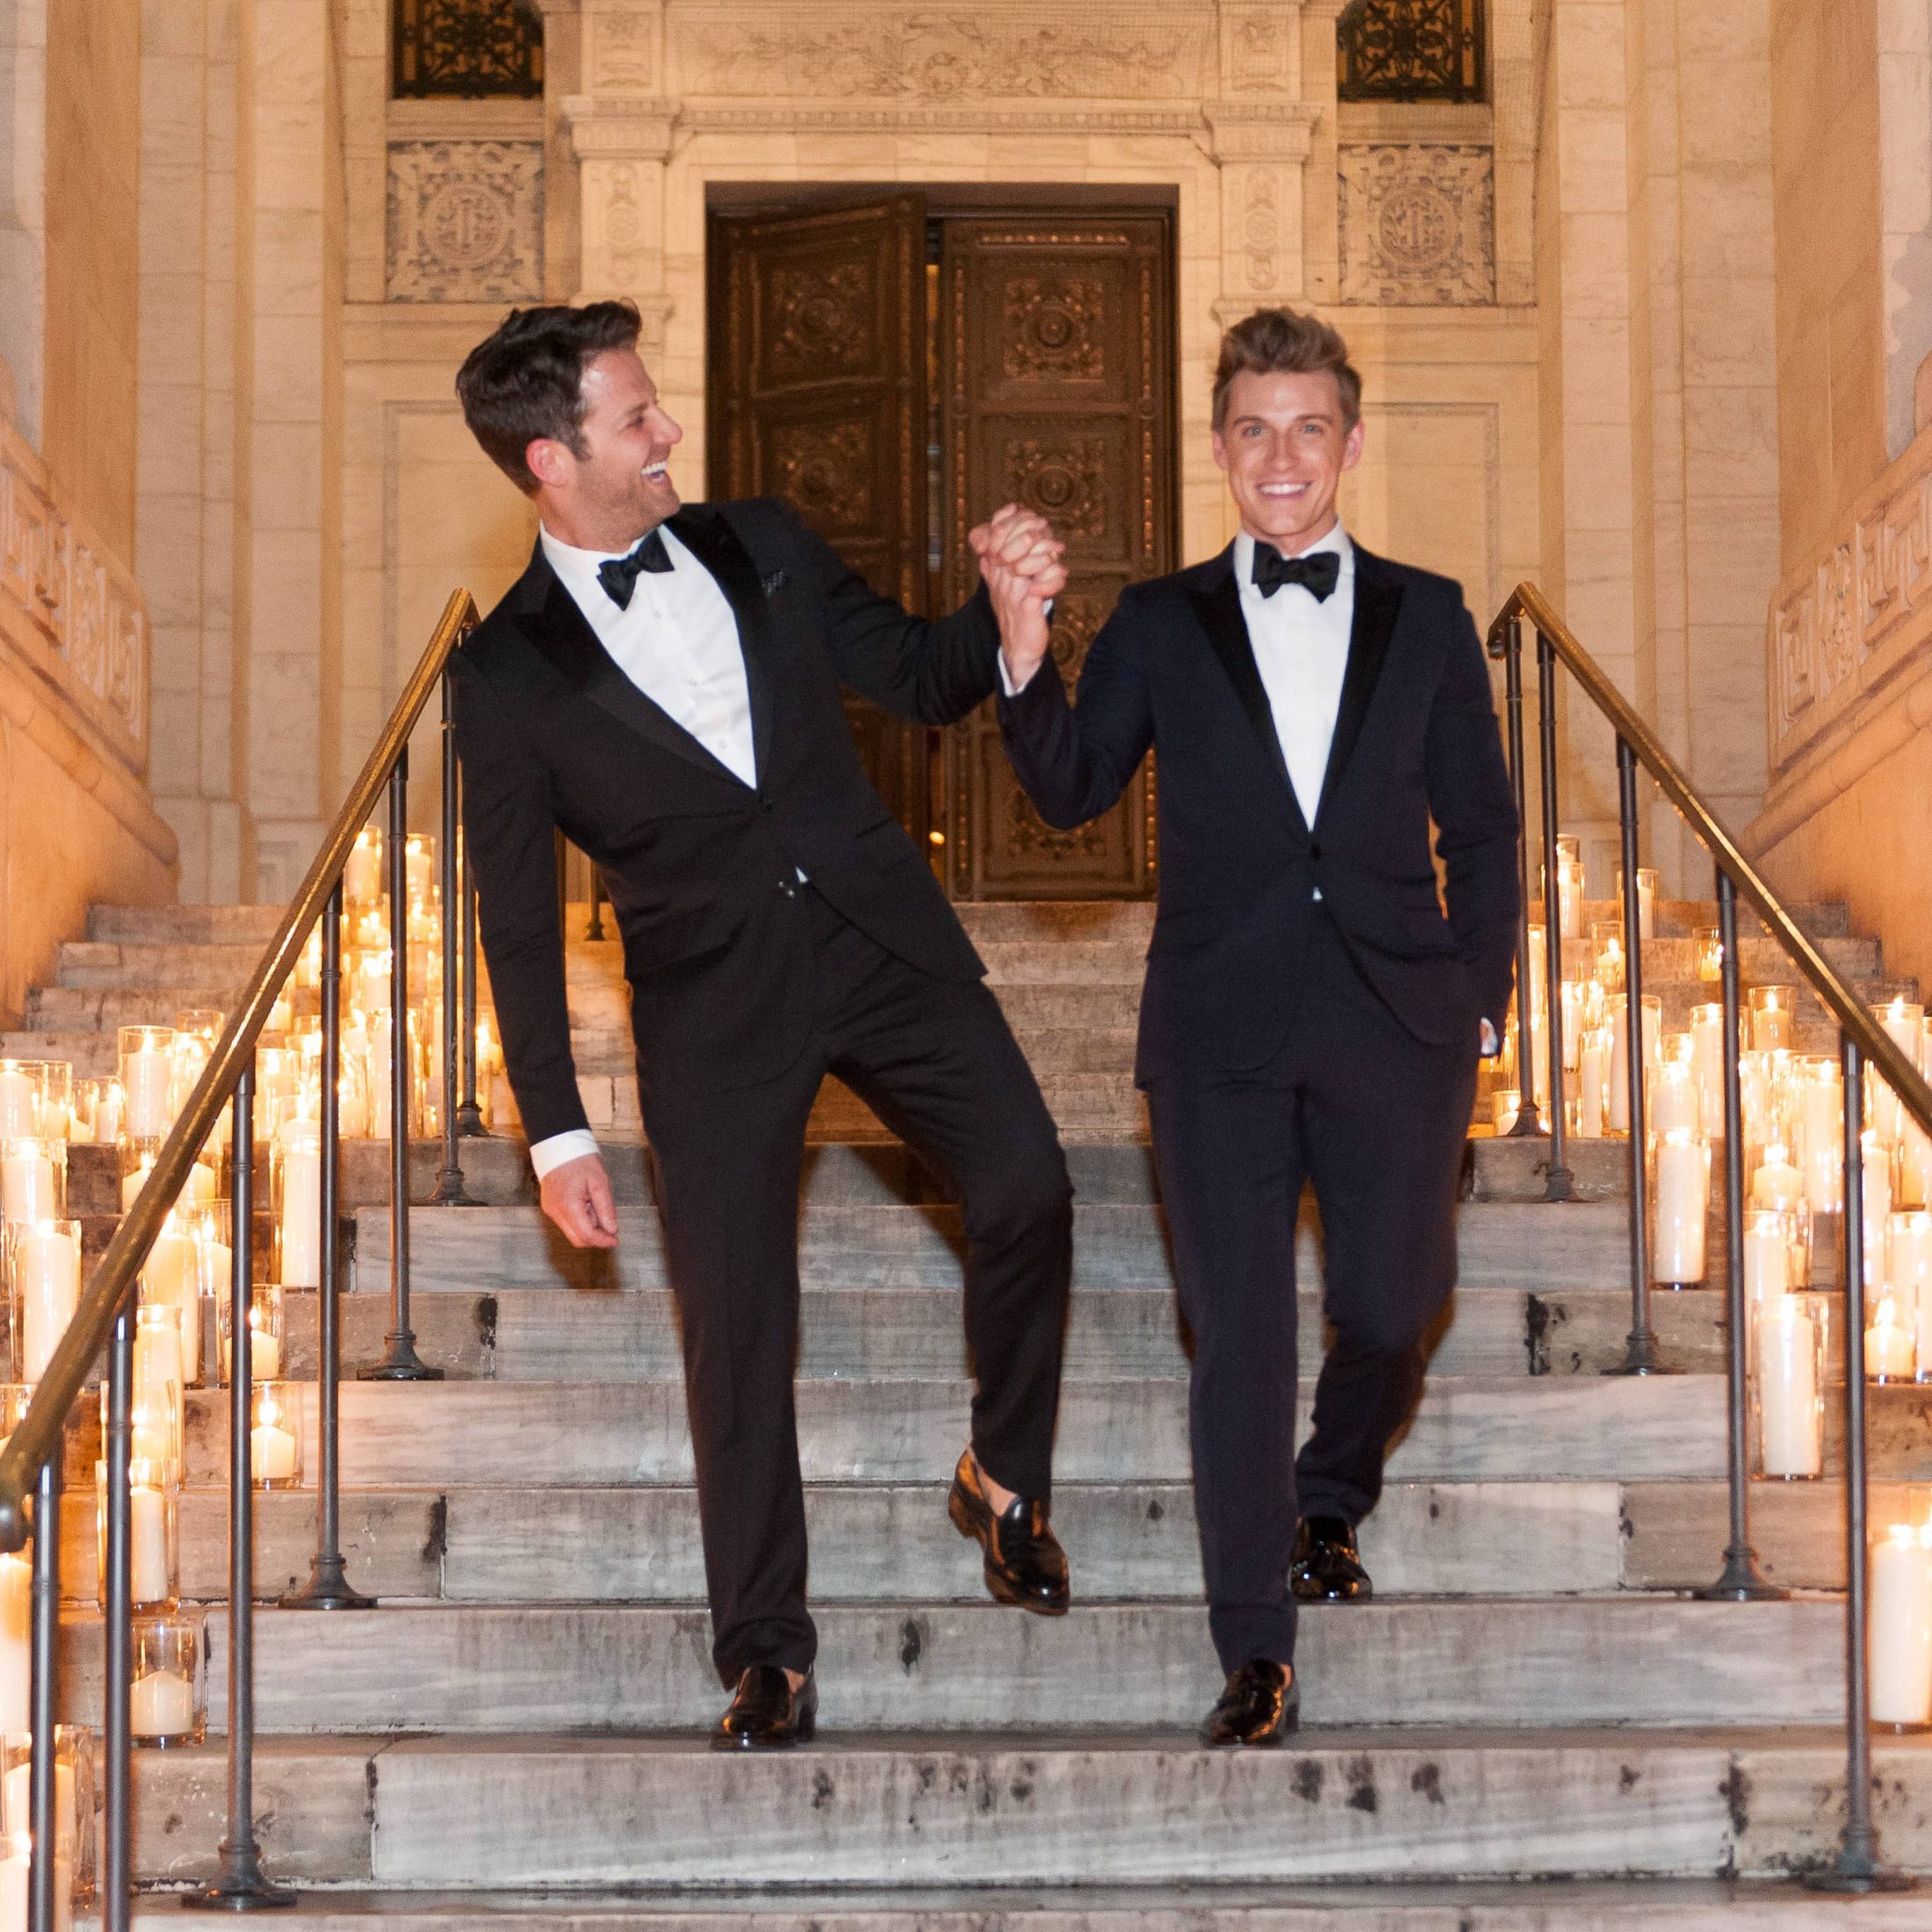 Grooms at this New York Public Library wedding | Photo by Genevieve de Manio